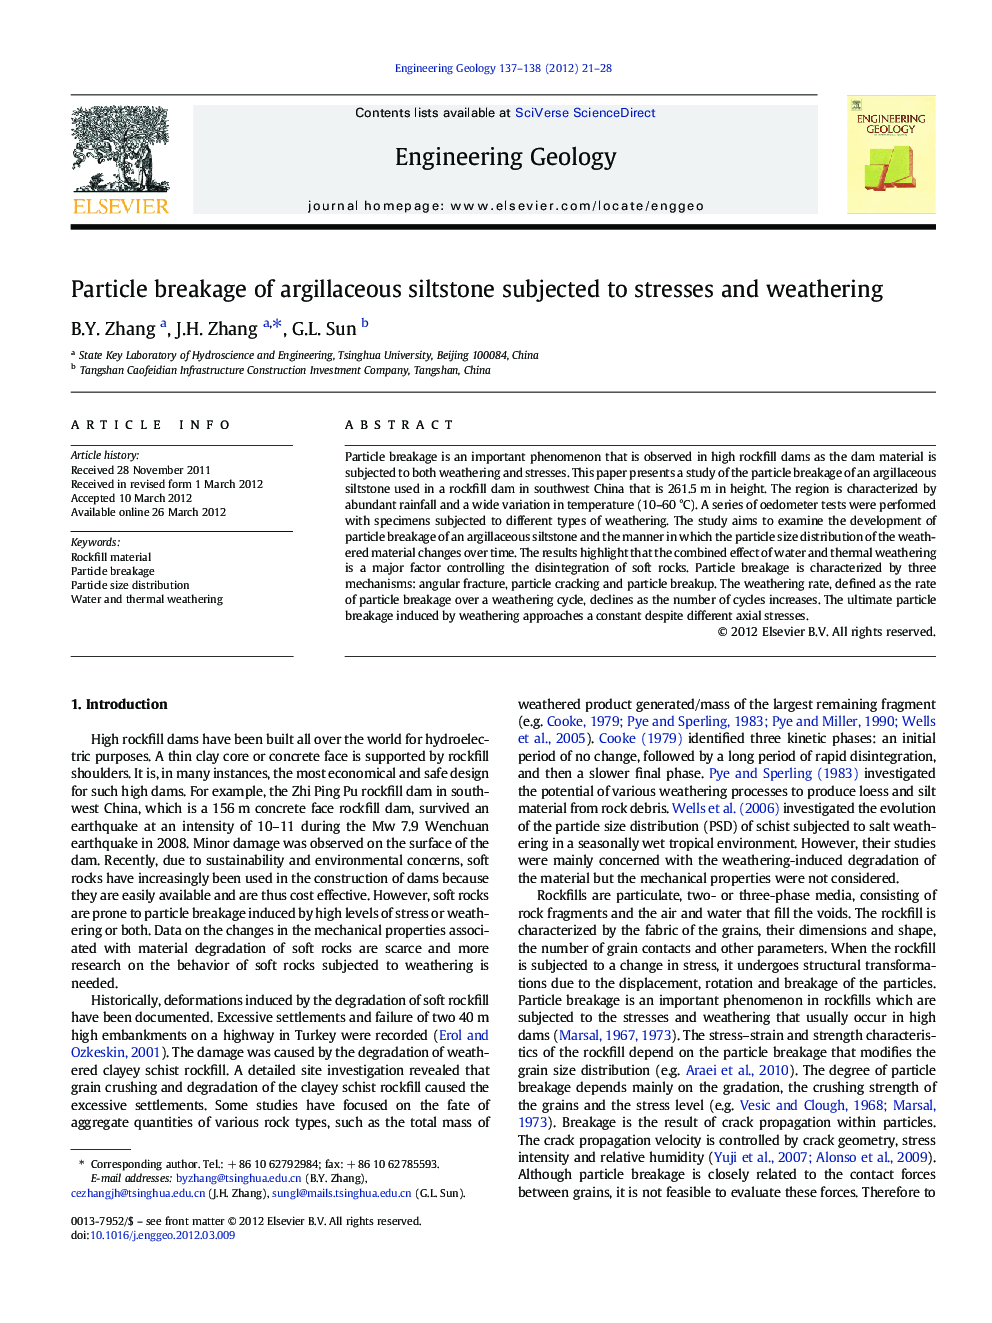 Particle breakage of argillaceous siltstone subjected to stresses and weathering